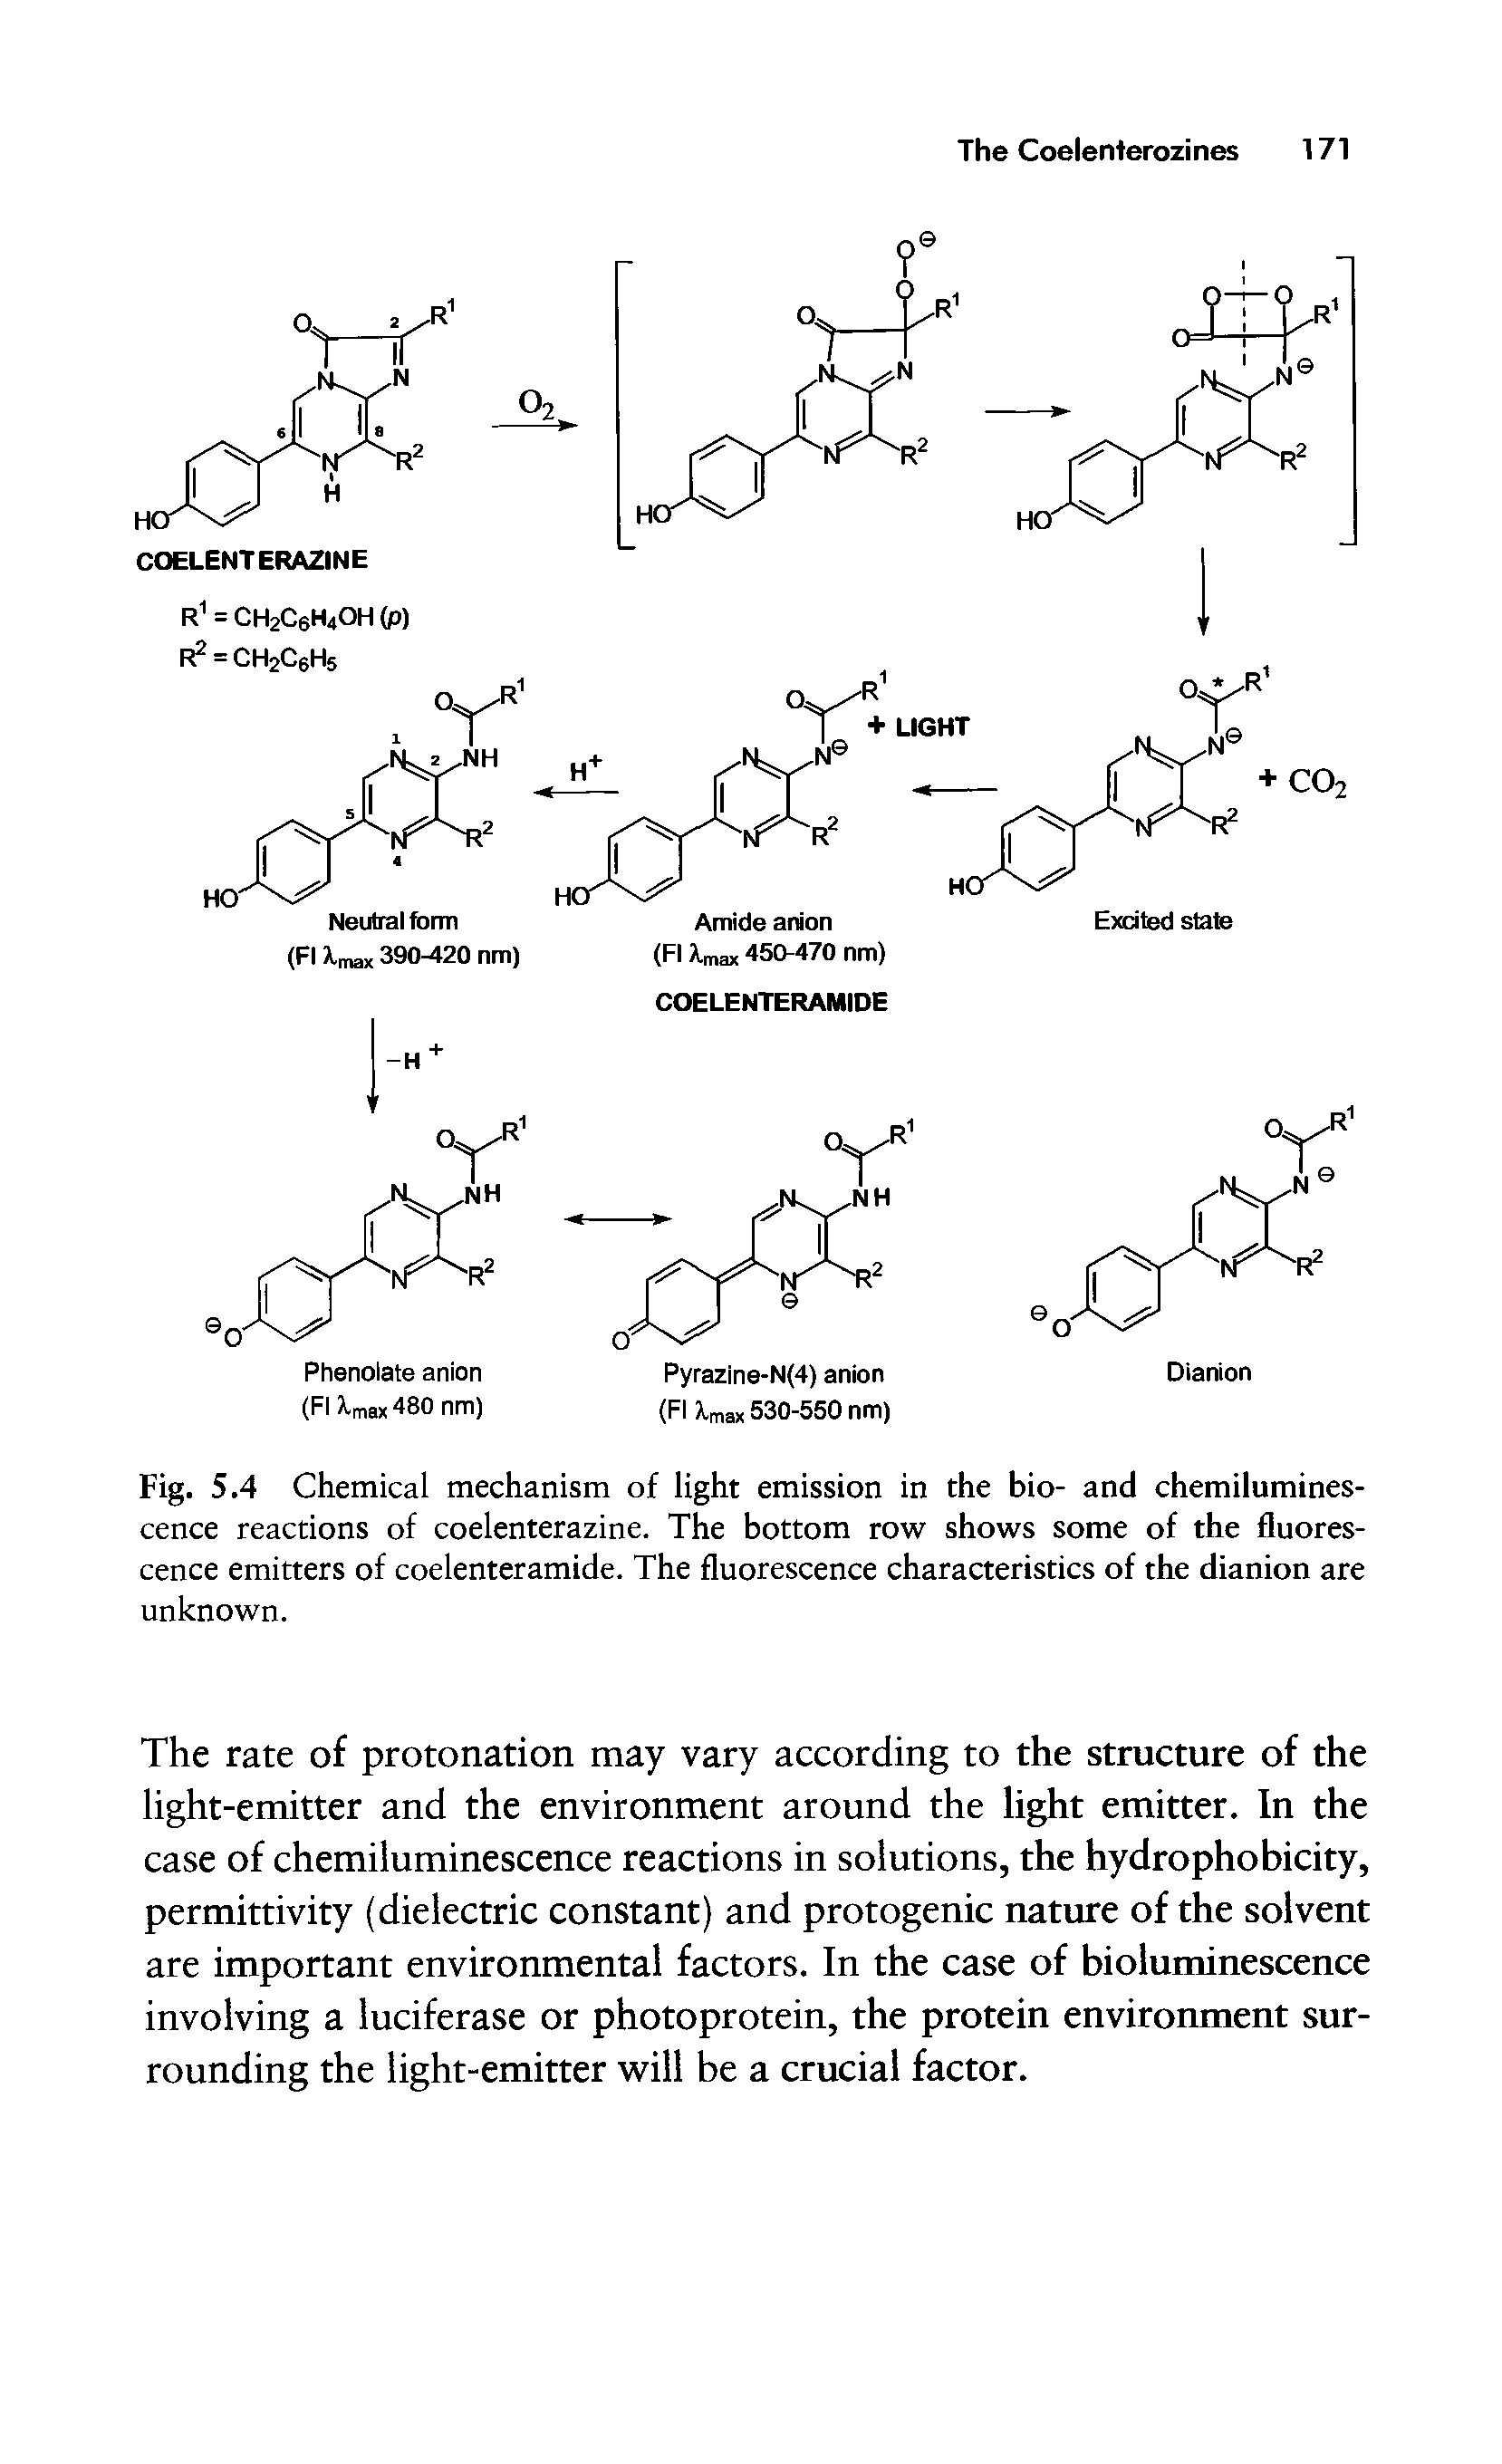 Fig. 5.4 Chemical mechanism of light emission in the bio- and chemiluminescence reactions of coelenterazine. The bottom row shows some of the fluorescence emitters of coelenteramide. The fluorescence characteristics of the dianion are unknown.